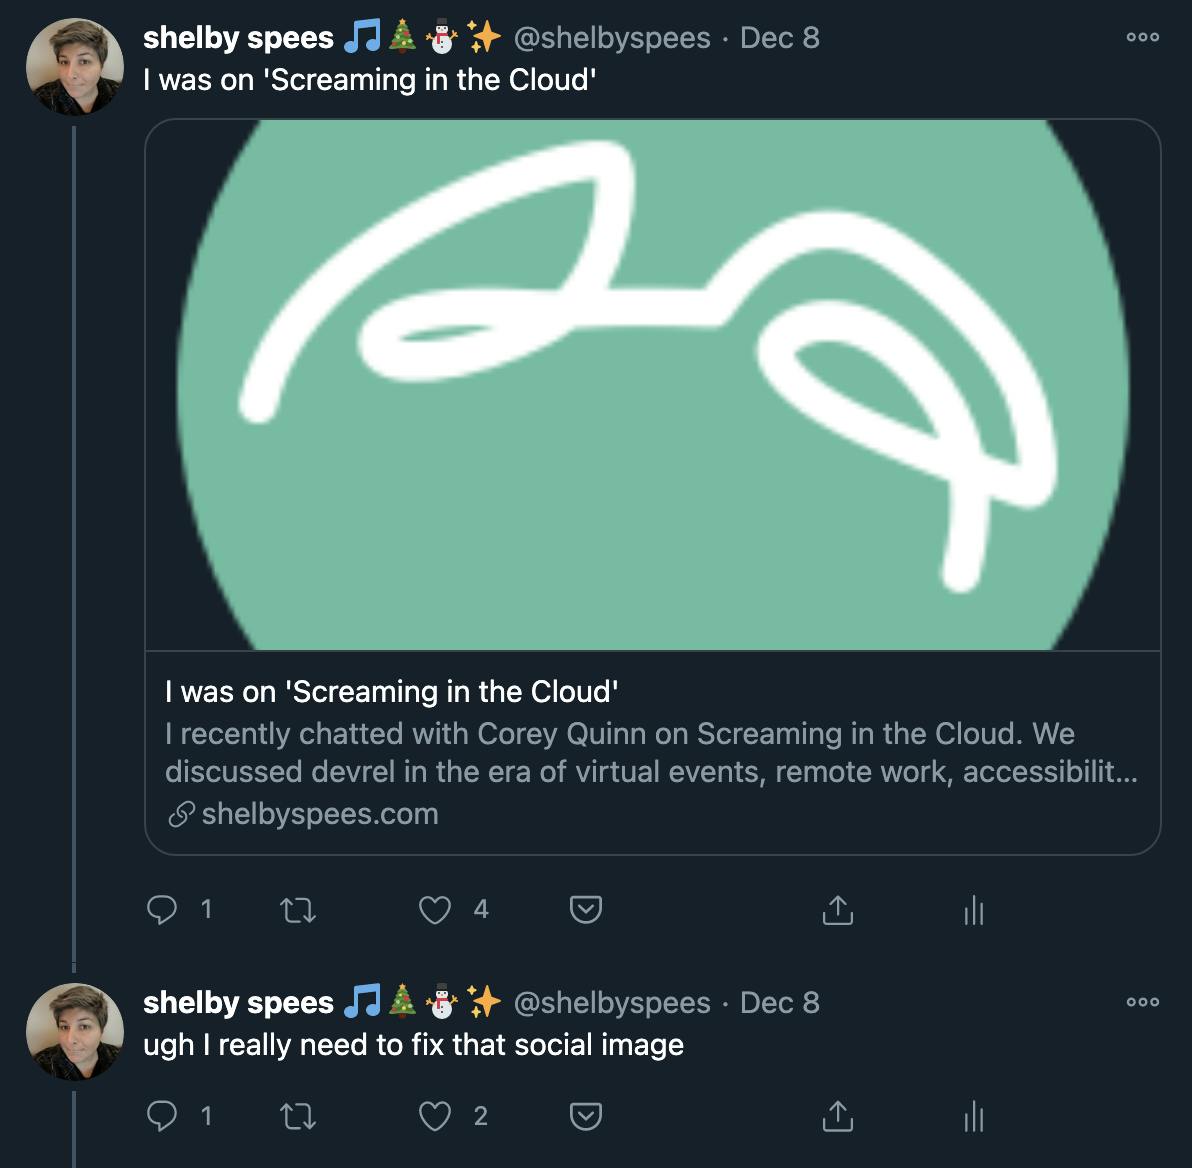 twitter thread. first tweet is a link to Shelby’s blog post ‘I was on Screaming in the Cloud.’ second tweet is Shelby saying, ‘ugh I really need to fix that social image’